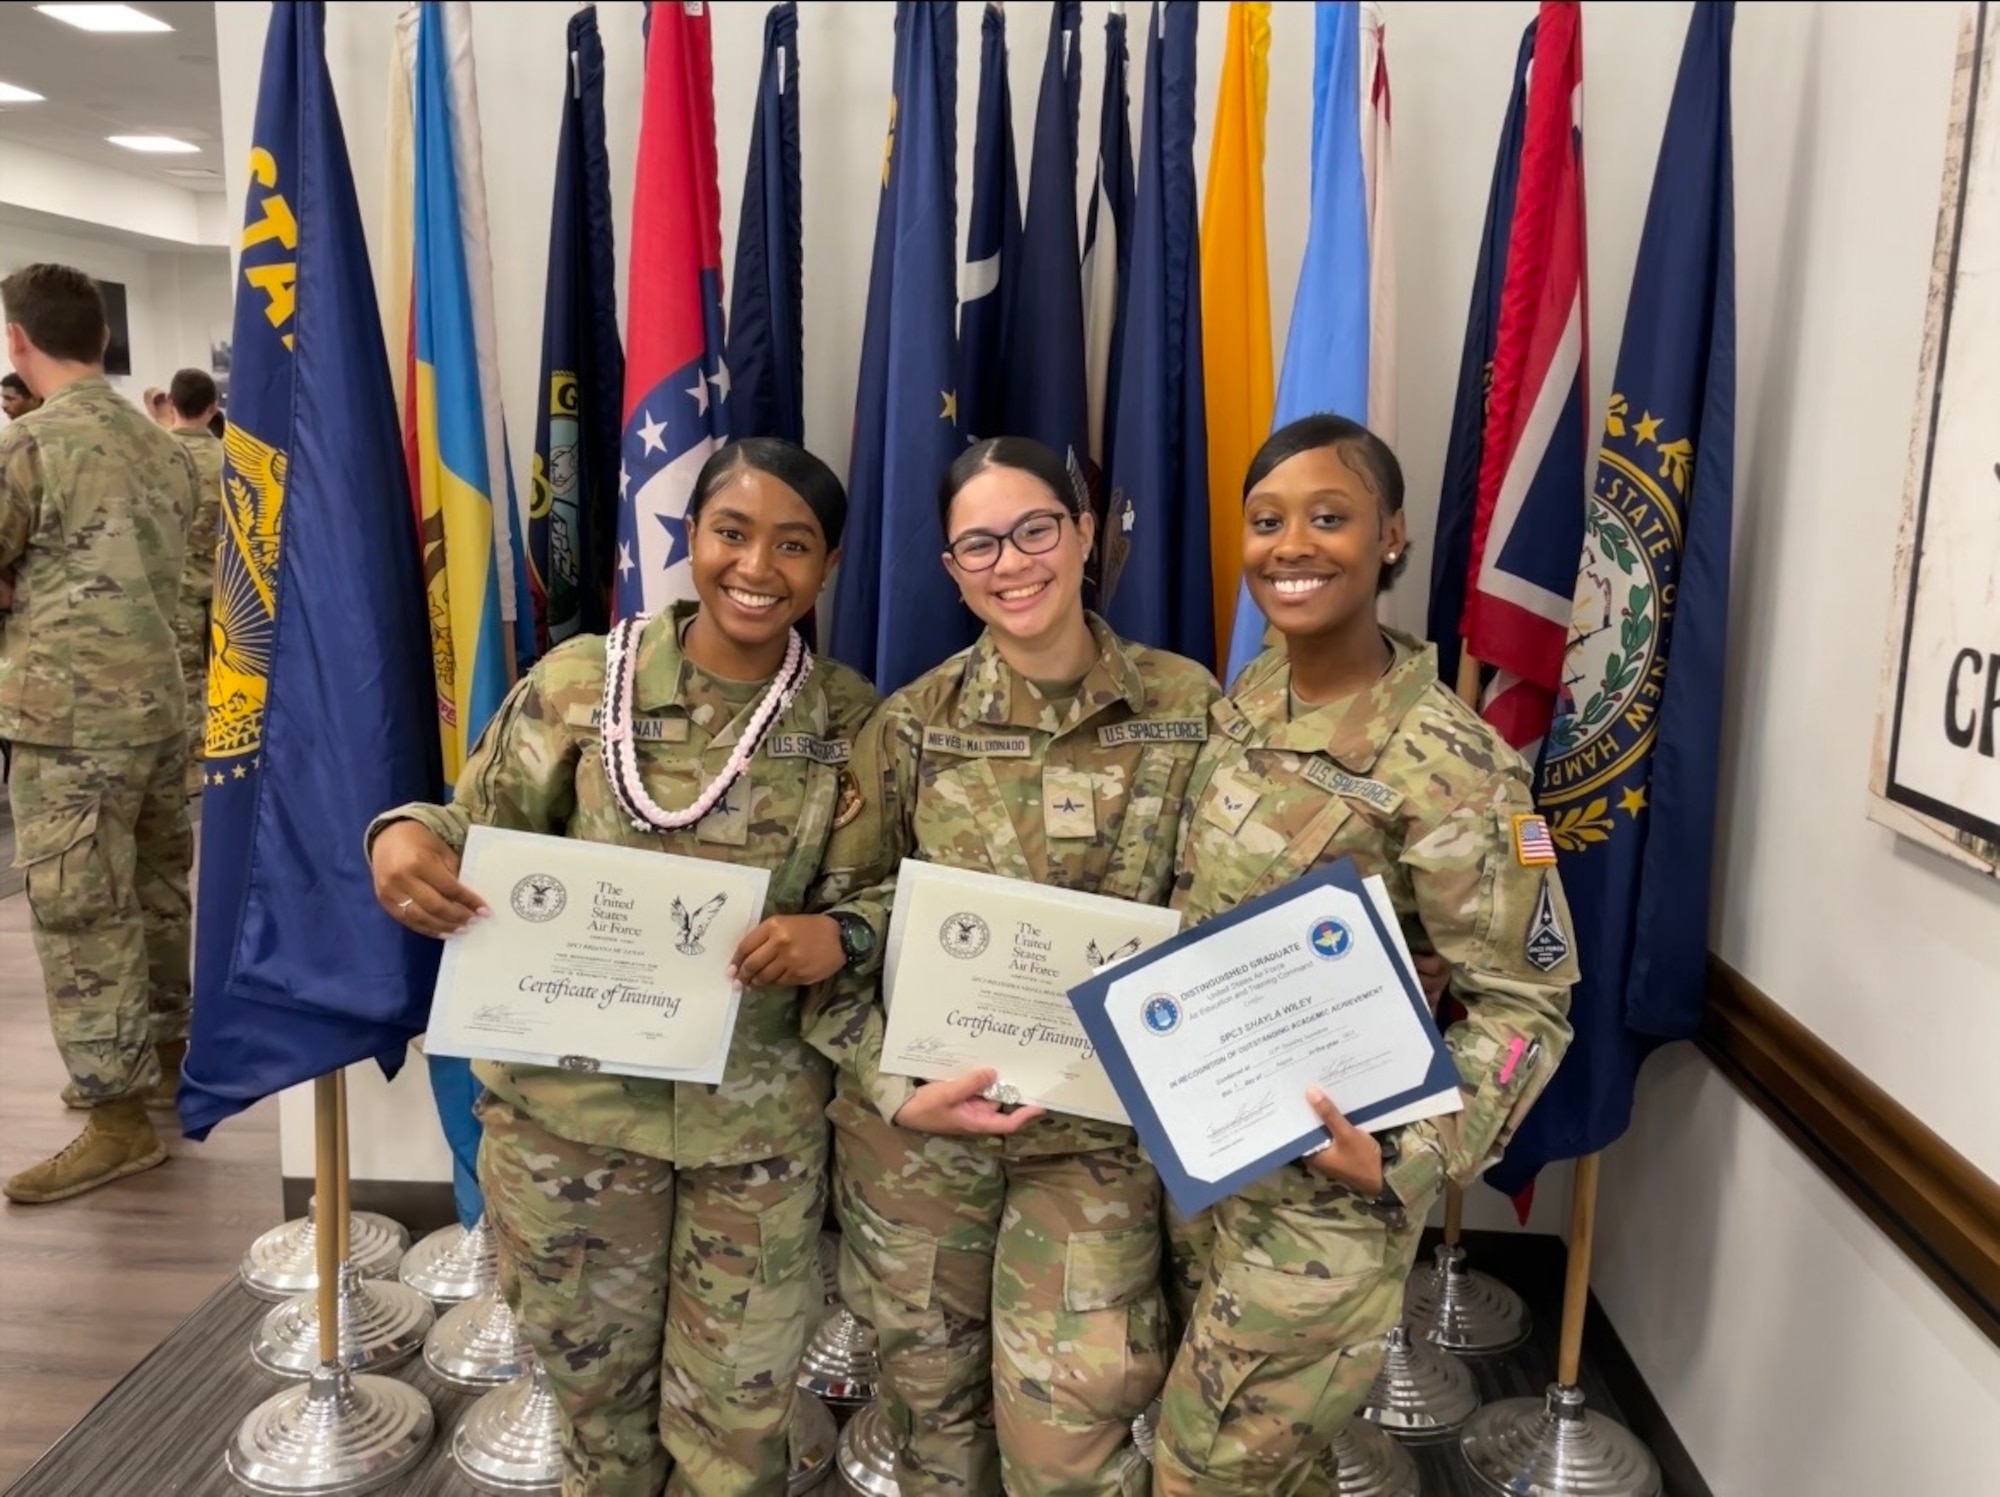 U.S. Space Force Spc. 3 Shayla Wiley, 74th Intelligence, Surveillance and Reconnaissance stands next to two other Guardians holding a training certificate.